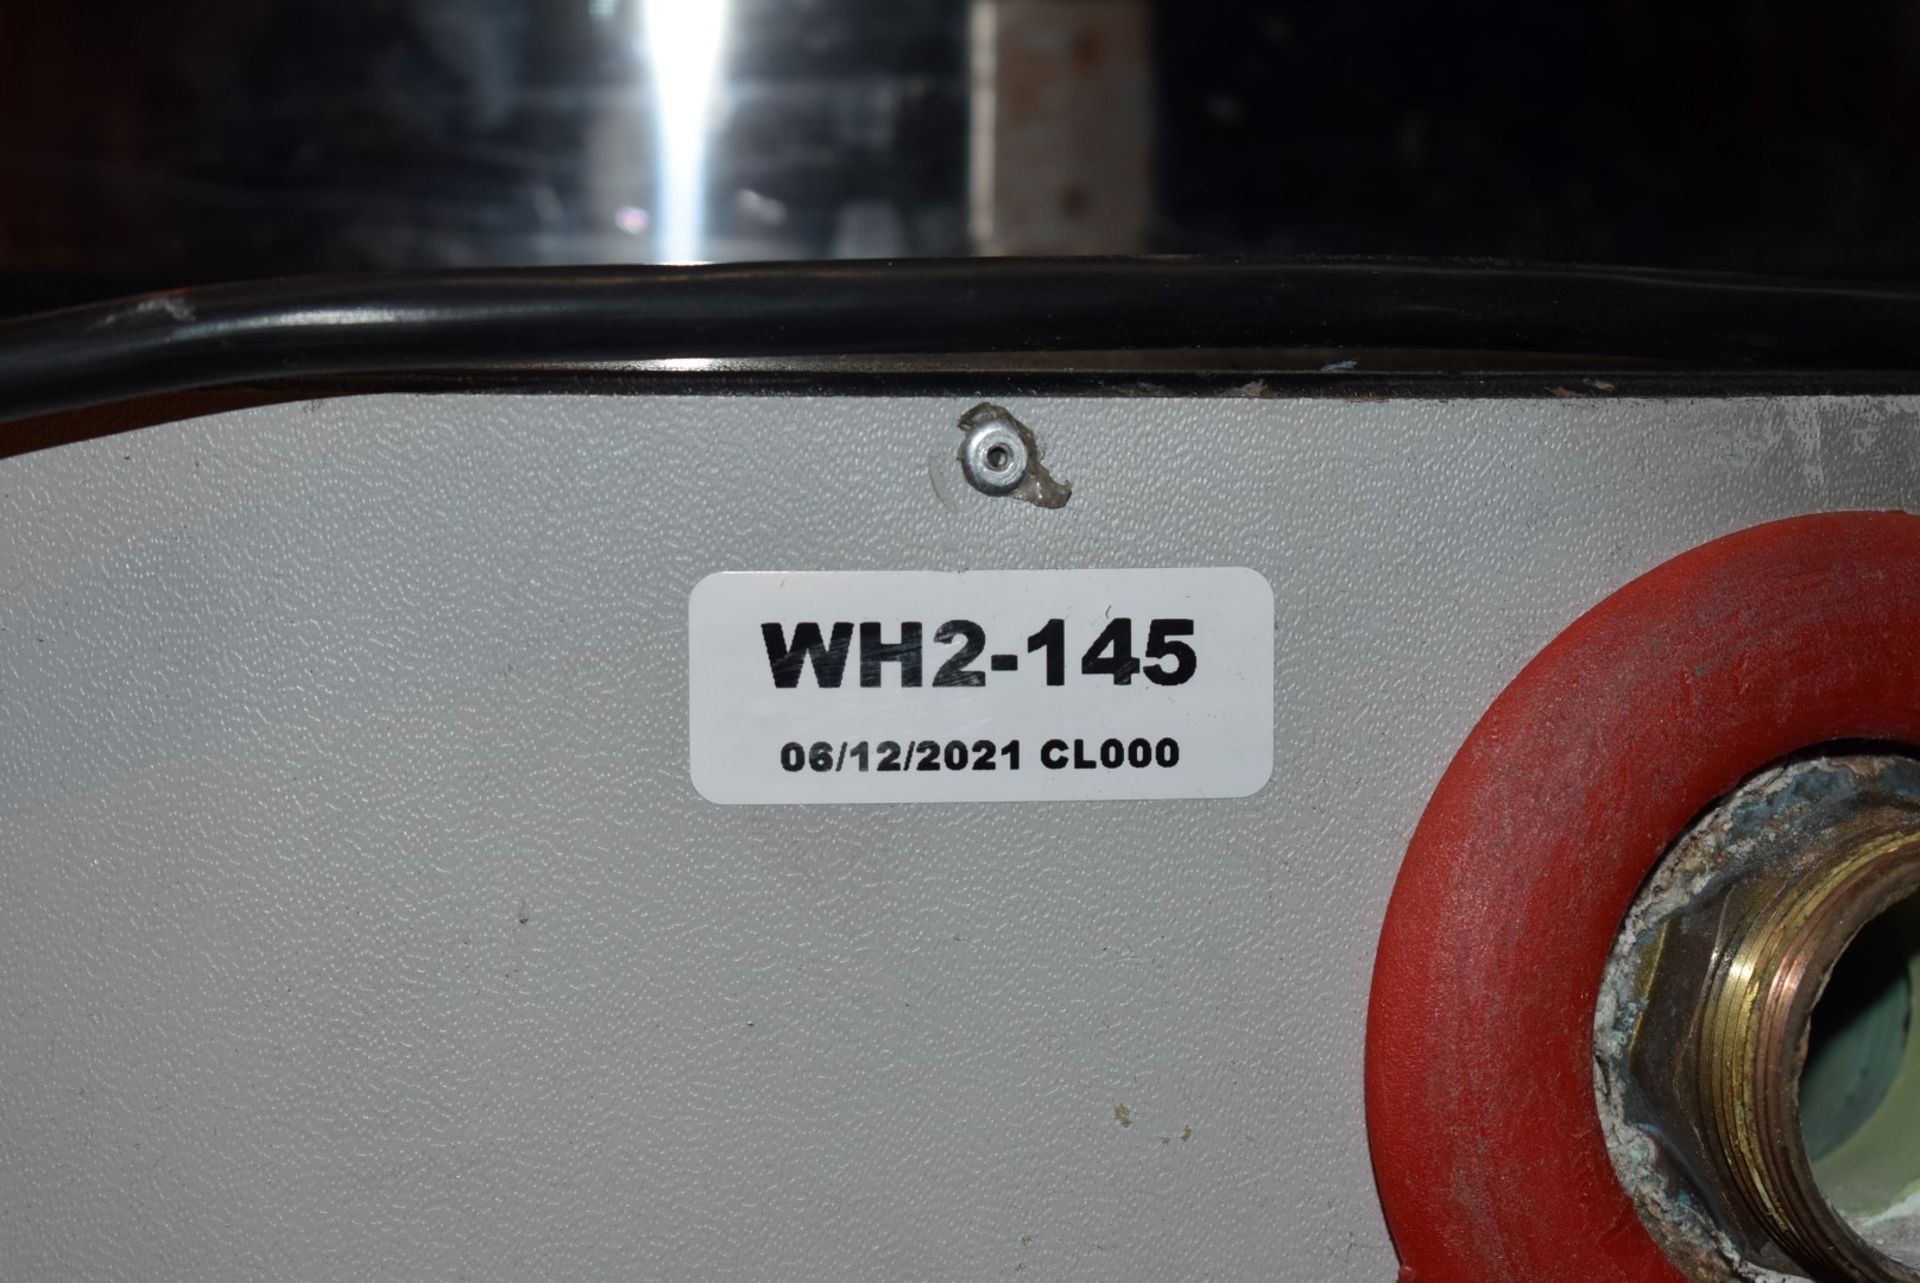 1 x Lochinvar High Efficiency Gas Fired 220L Storage Water Heater - Model LBF-220 - Ref: WH2-145 H5D - Image 6 of 14